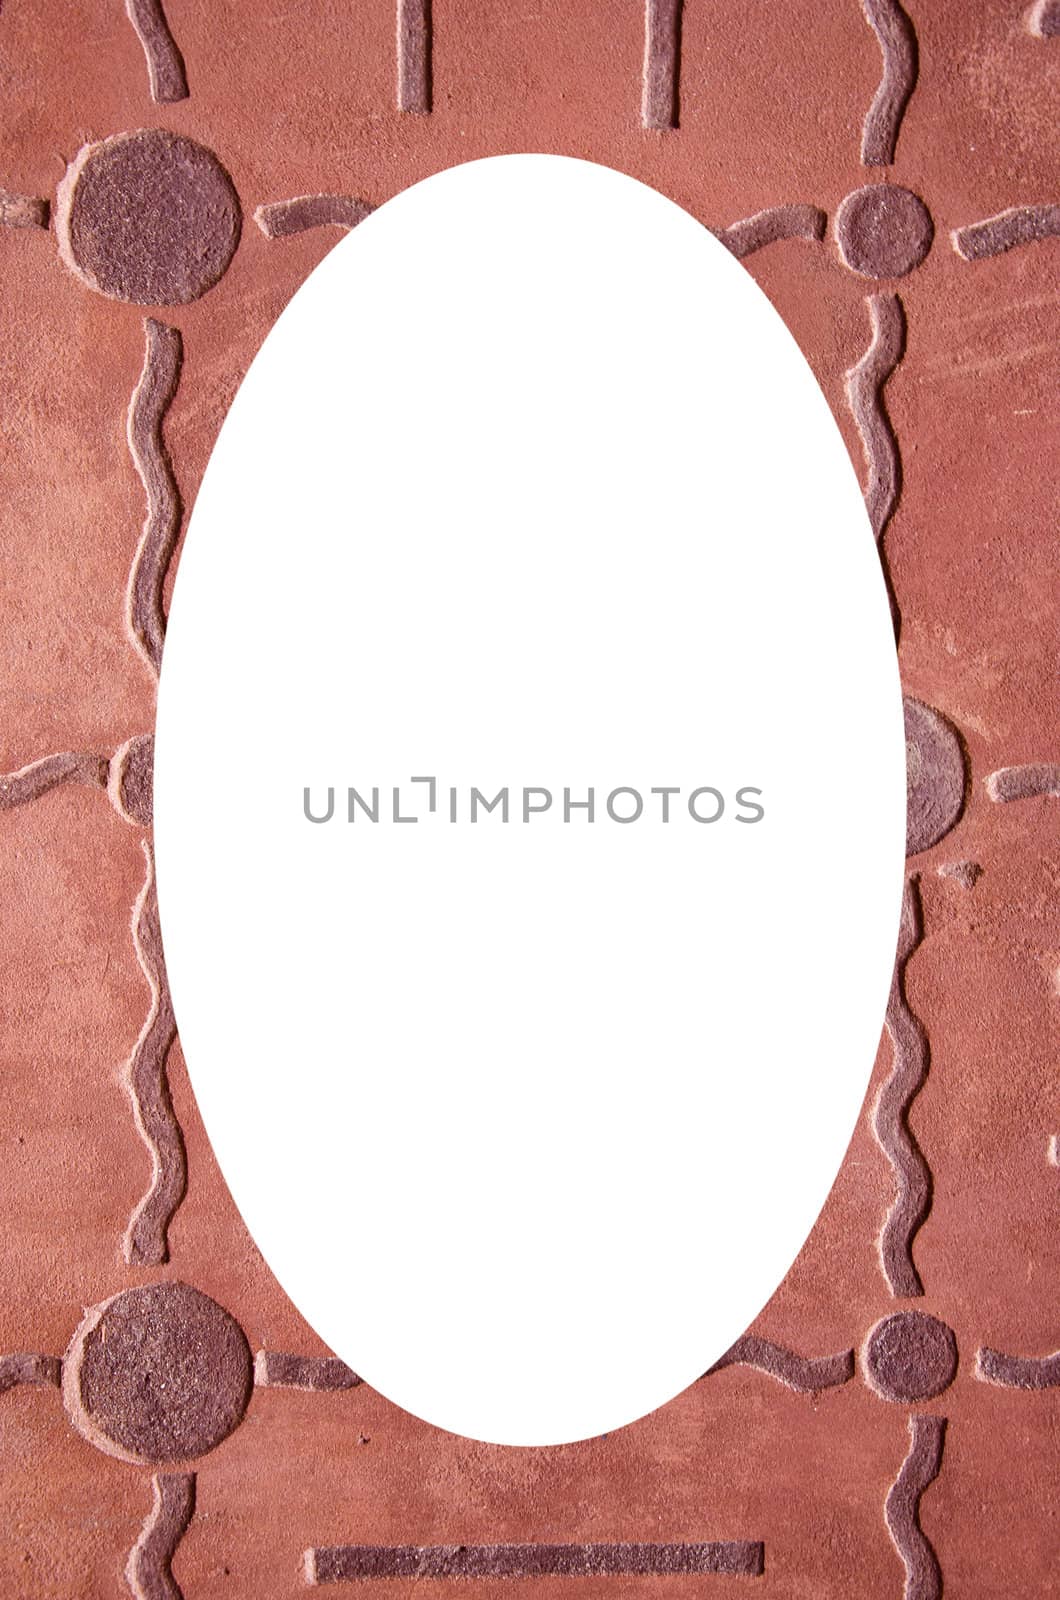 Interesting patterns and textures on walls of the building. Architectural background.Isolated white oval place for text photograph image in center of frame.